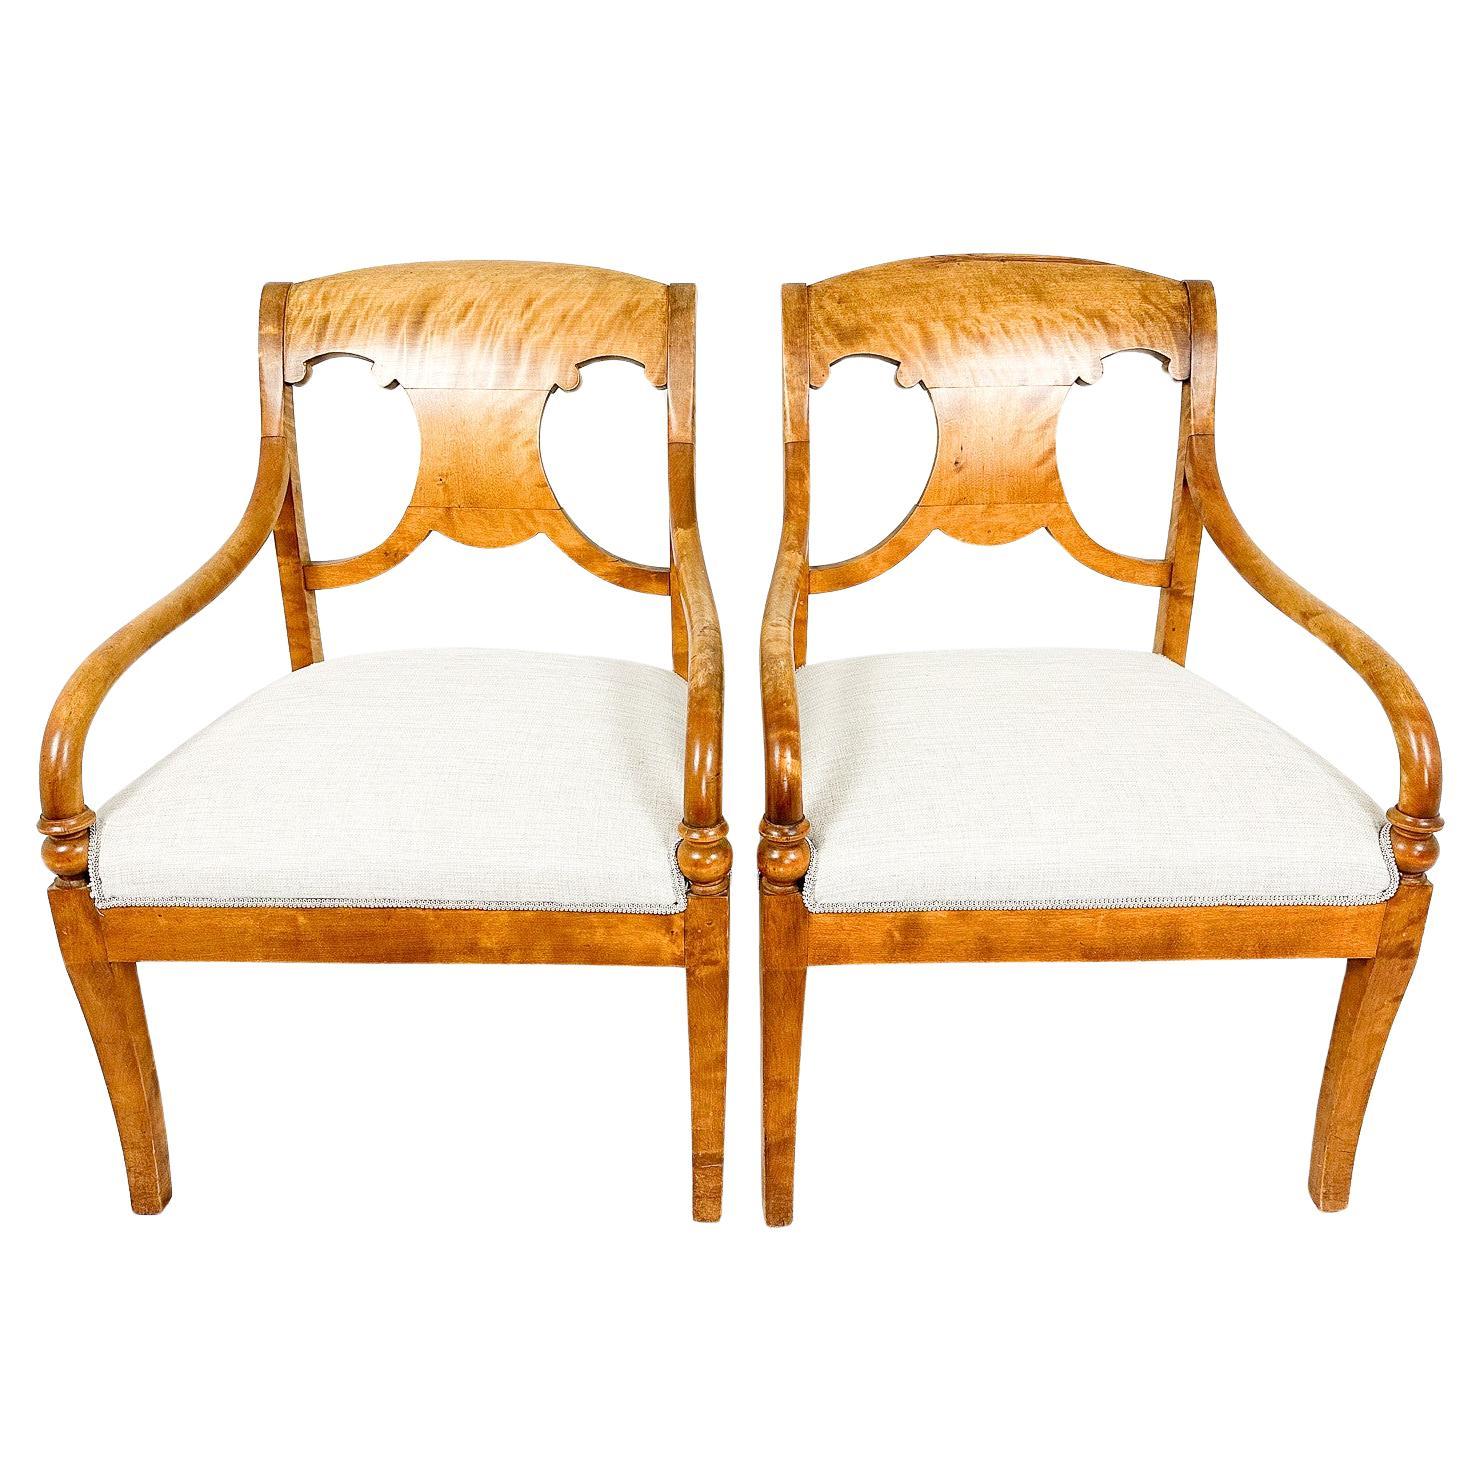 Biedermeier Carver Chairs Swedish Late 1800s Antique Quilted Golden Birch Round